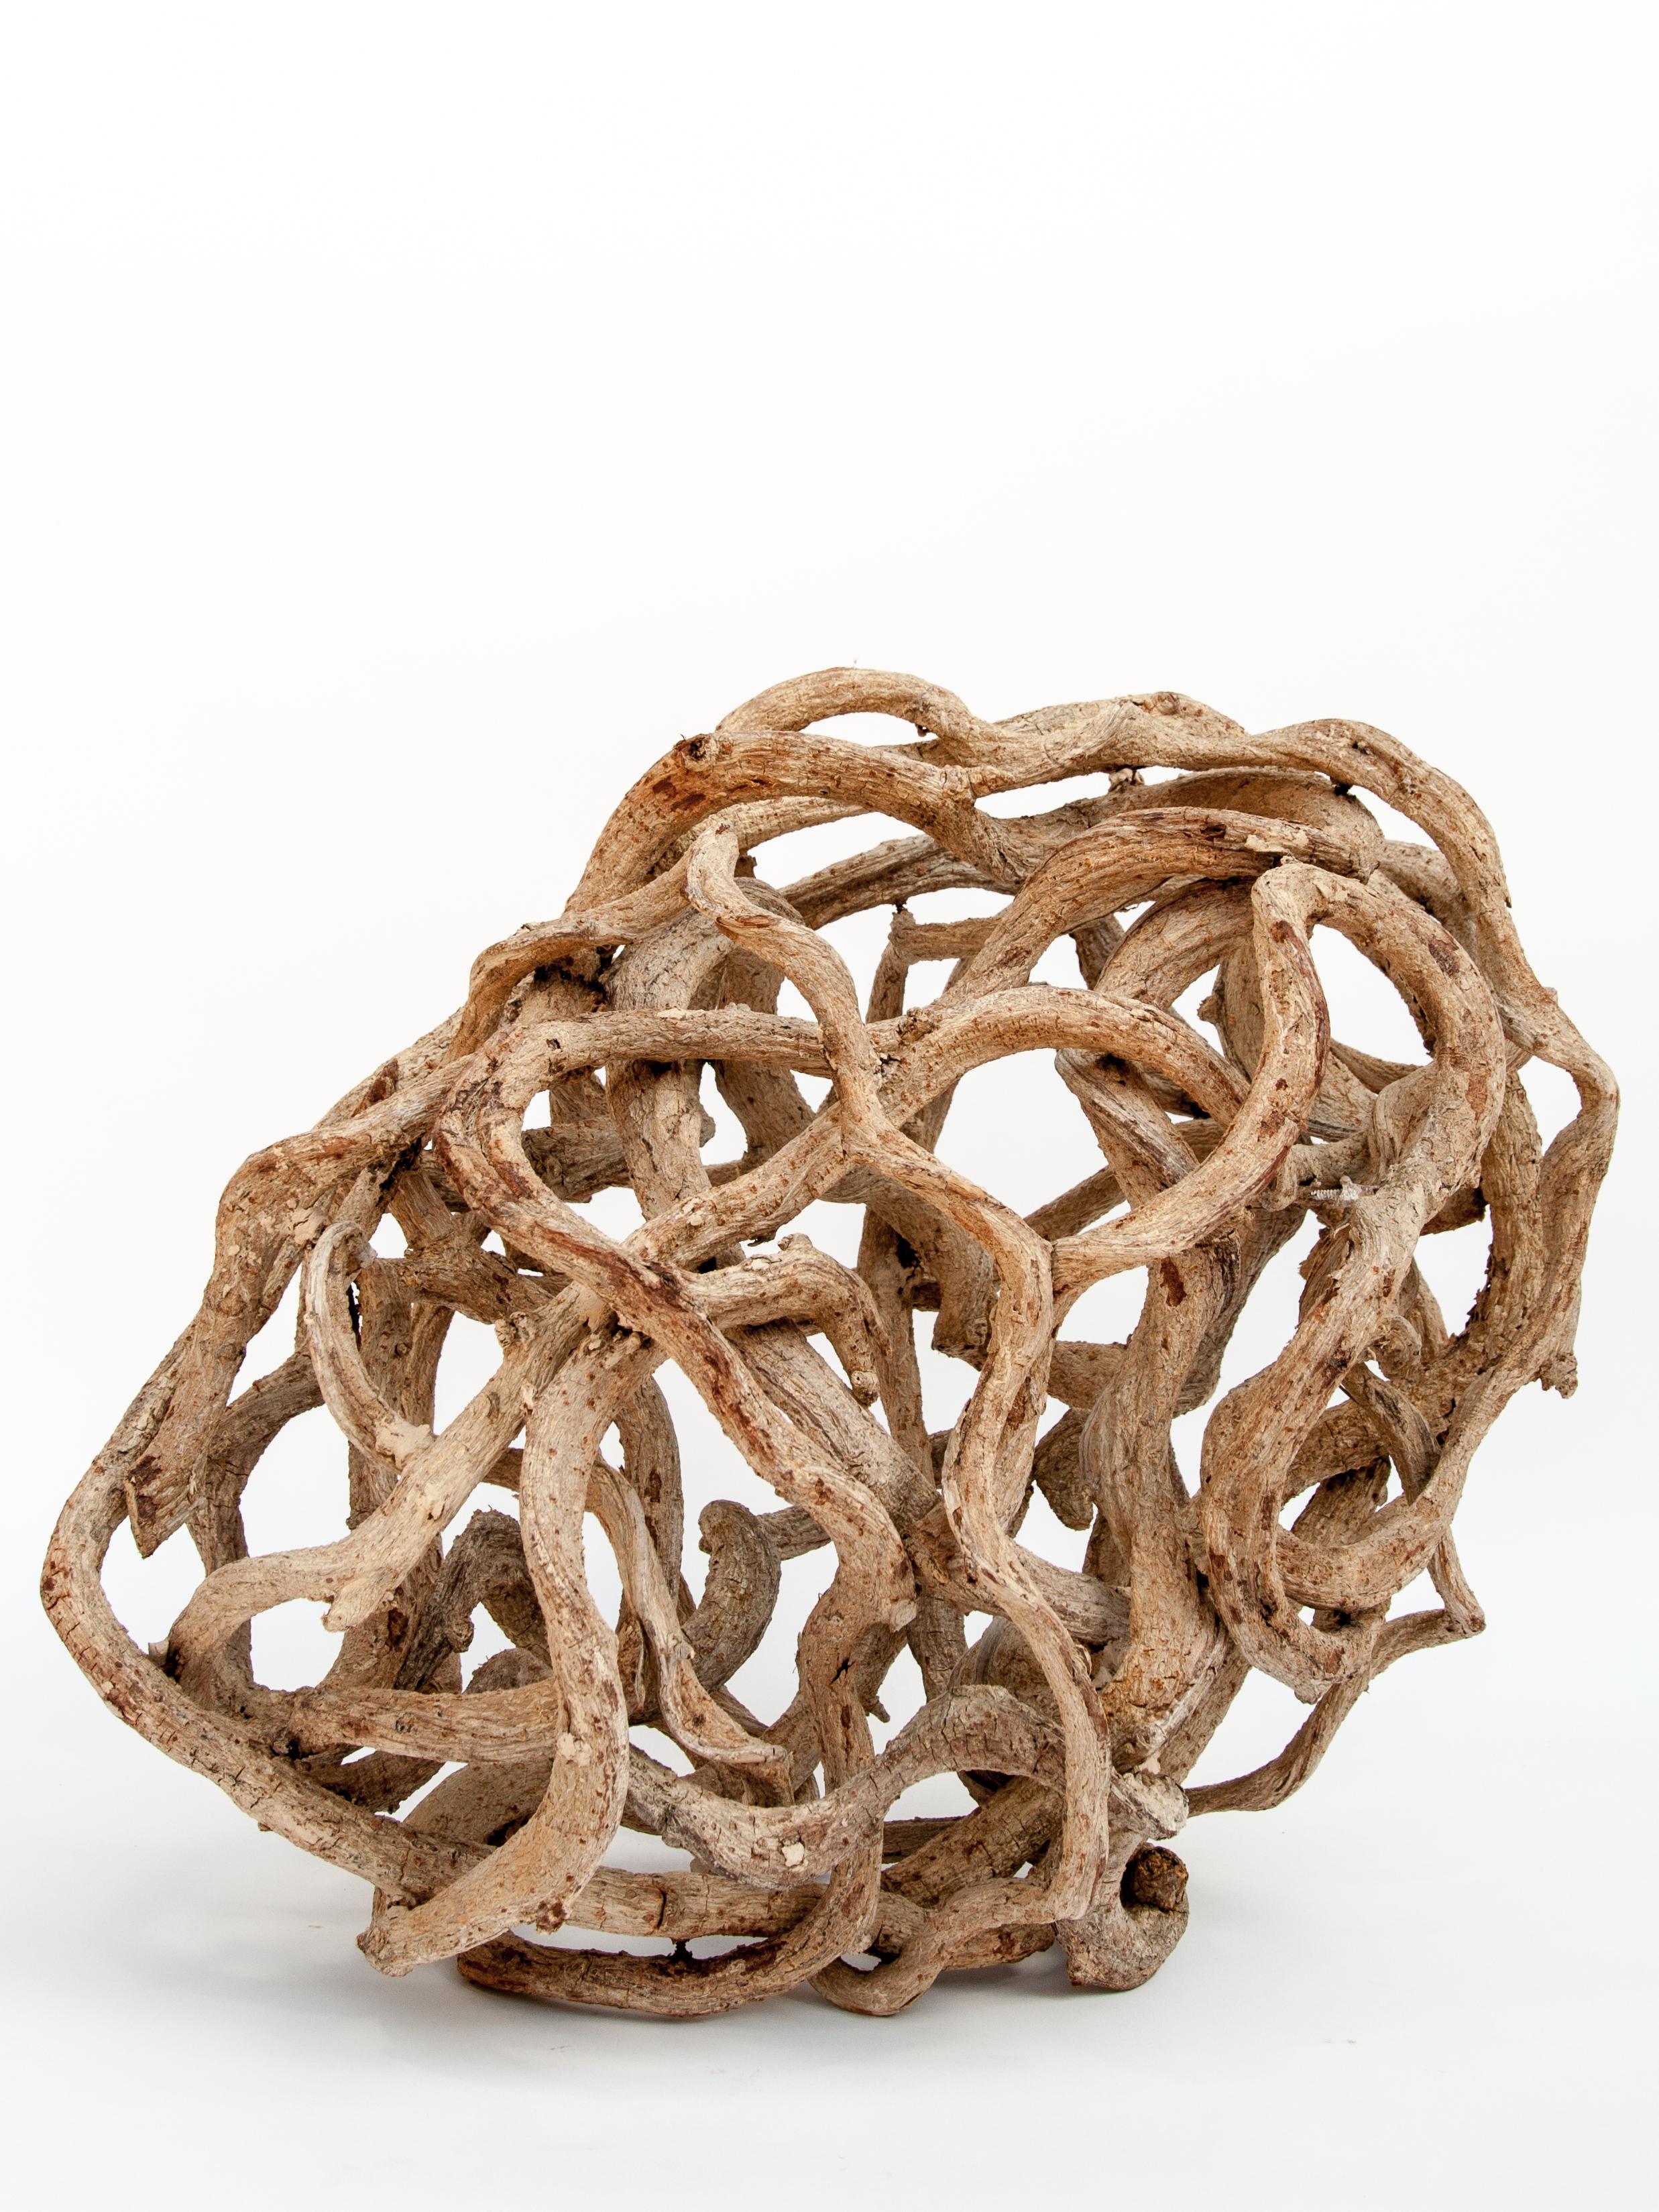 Bleached Liana Vine Organic Sculpture in Ovoid Shape, from Thailand